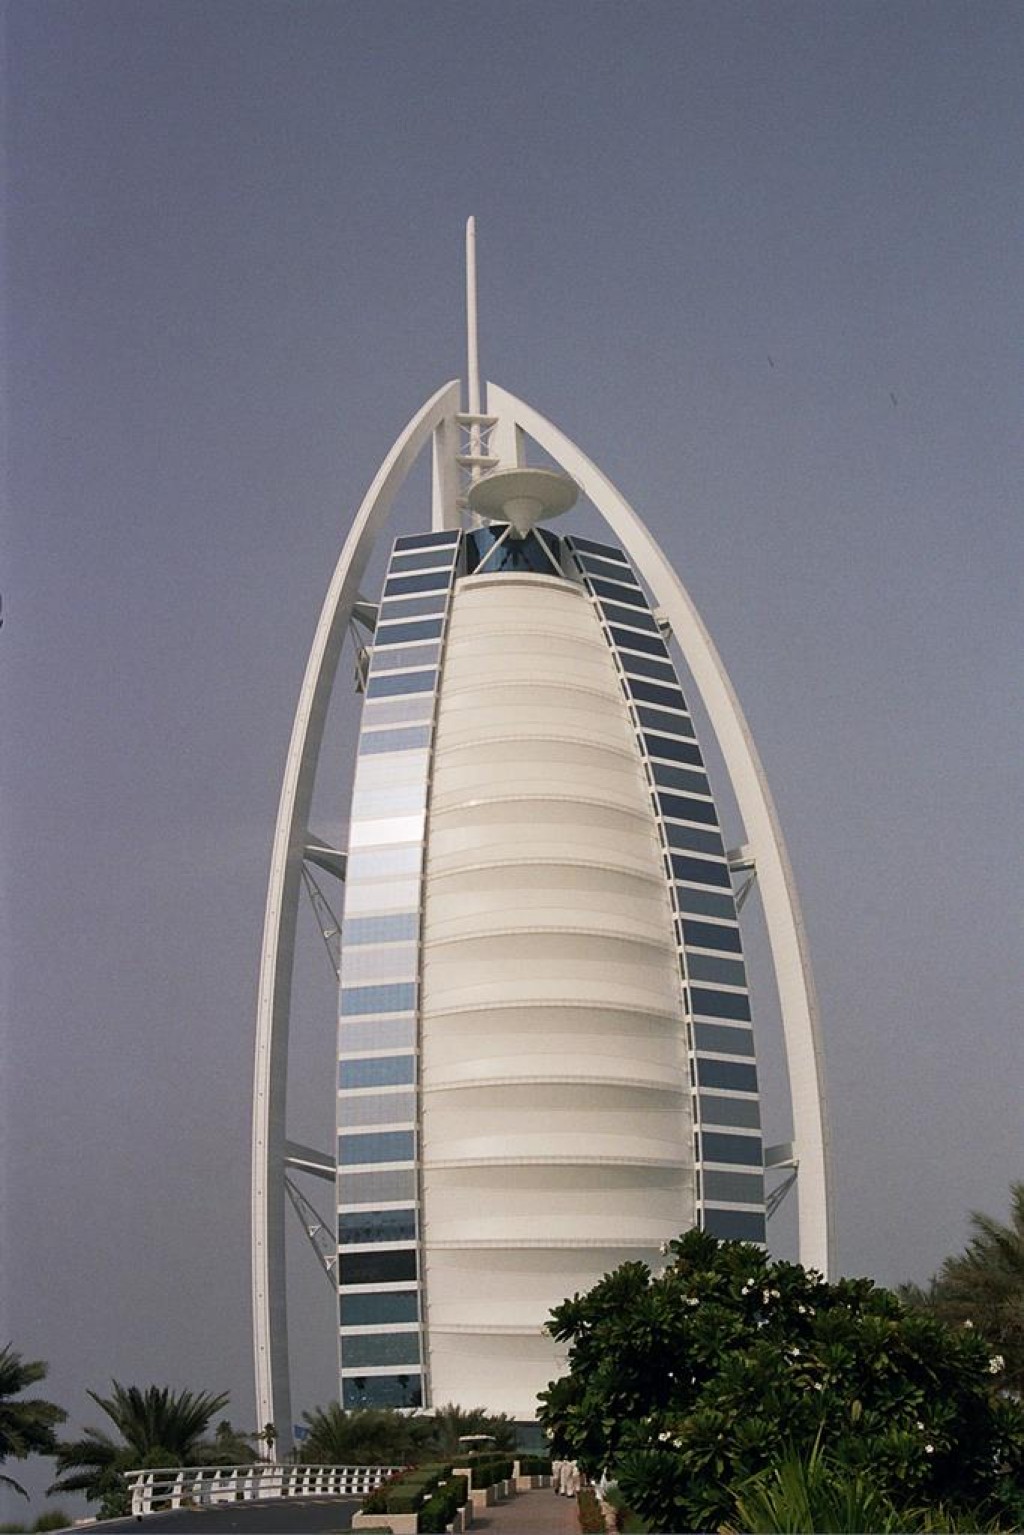 Our first view of Dubai's most famous building, the Burj Al Arab.  Just out of view are the security gates. It costs at least $70 a person, with some strict dress requirements, just to get inside to visit.